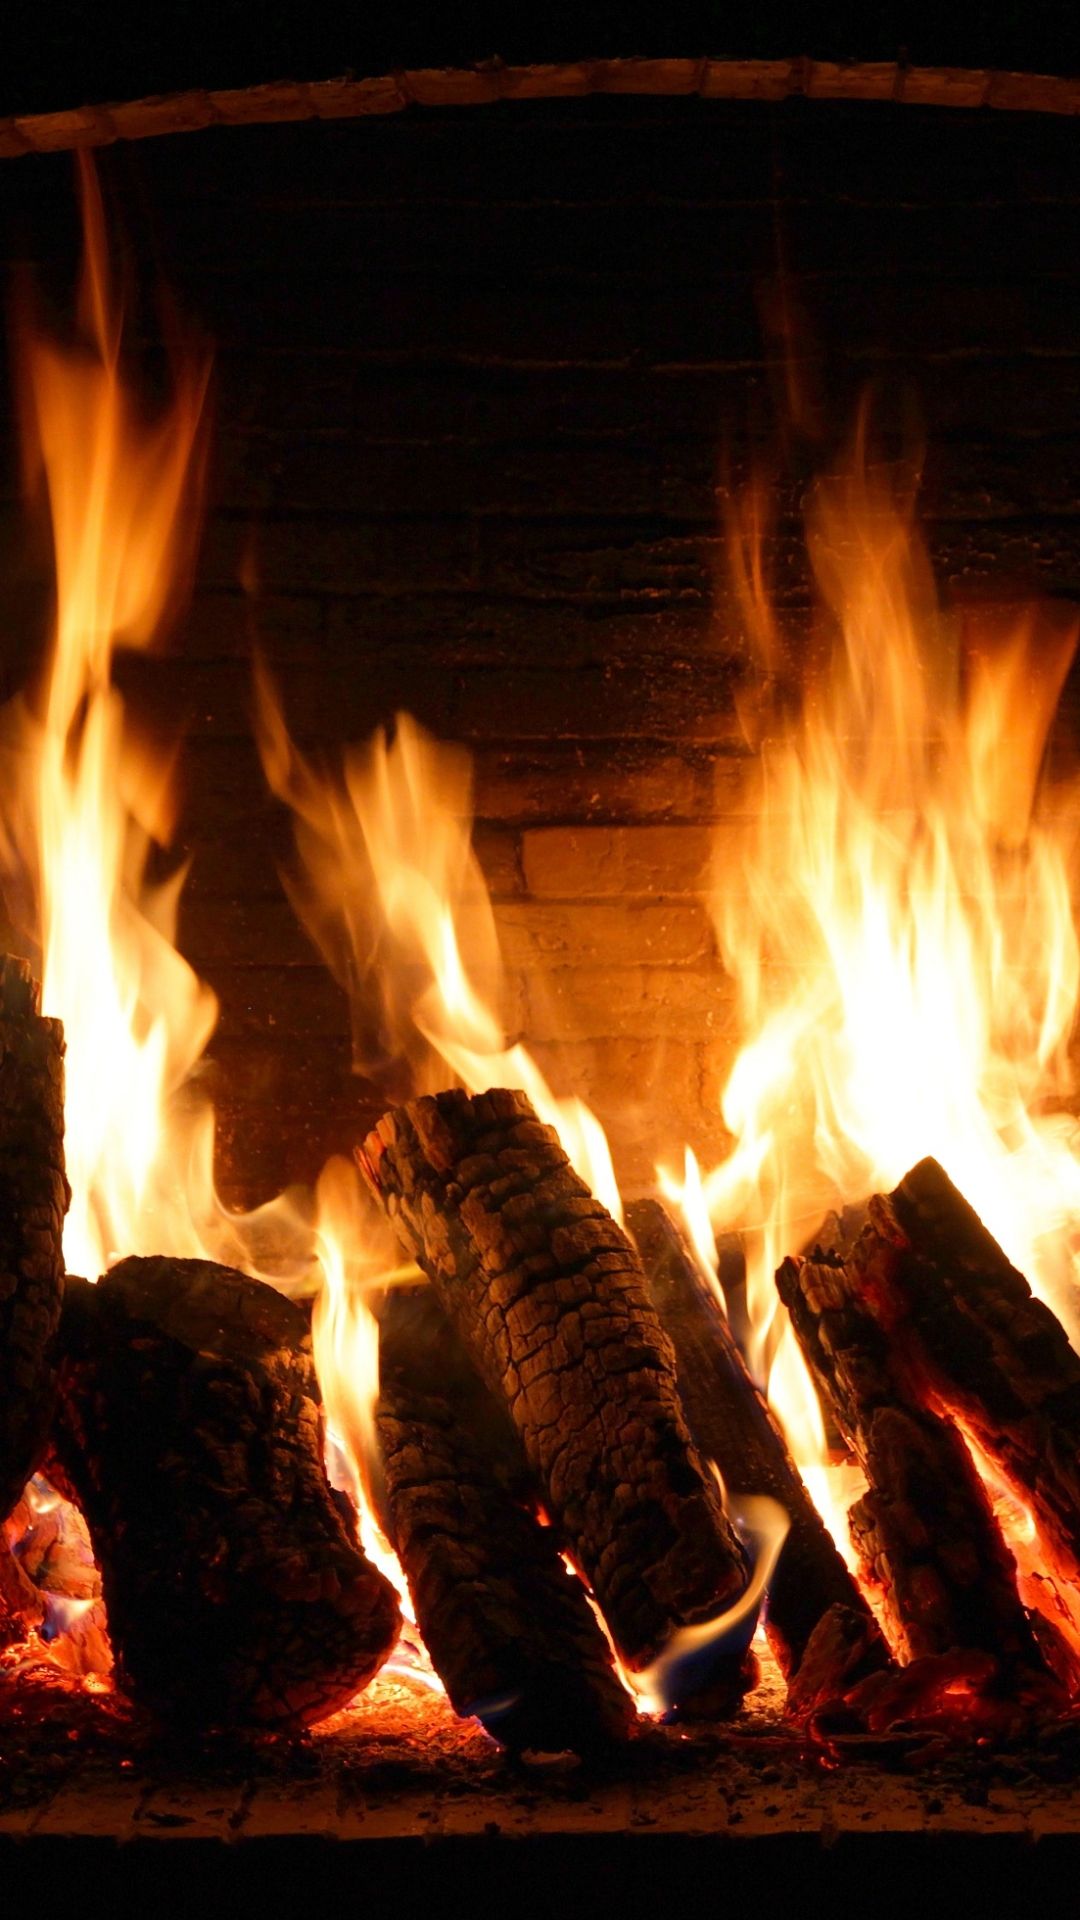 Fireplace Live Wallpaper Best Of Pin On Wallpapers